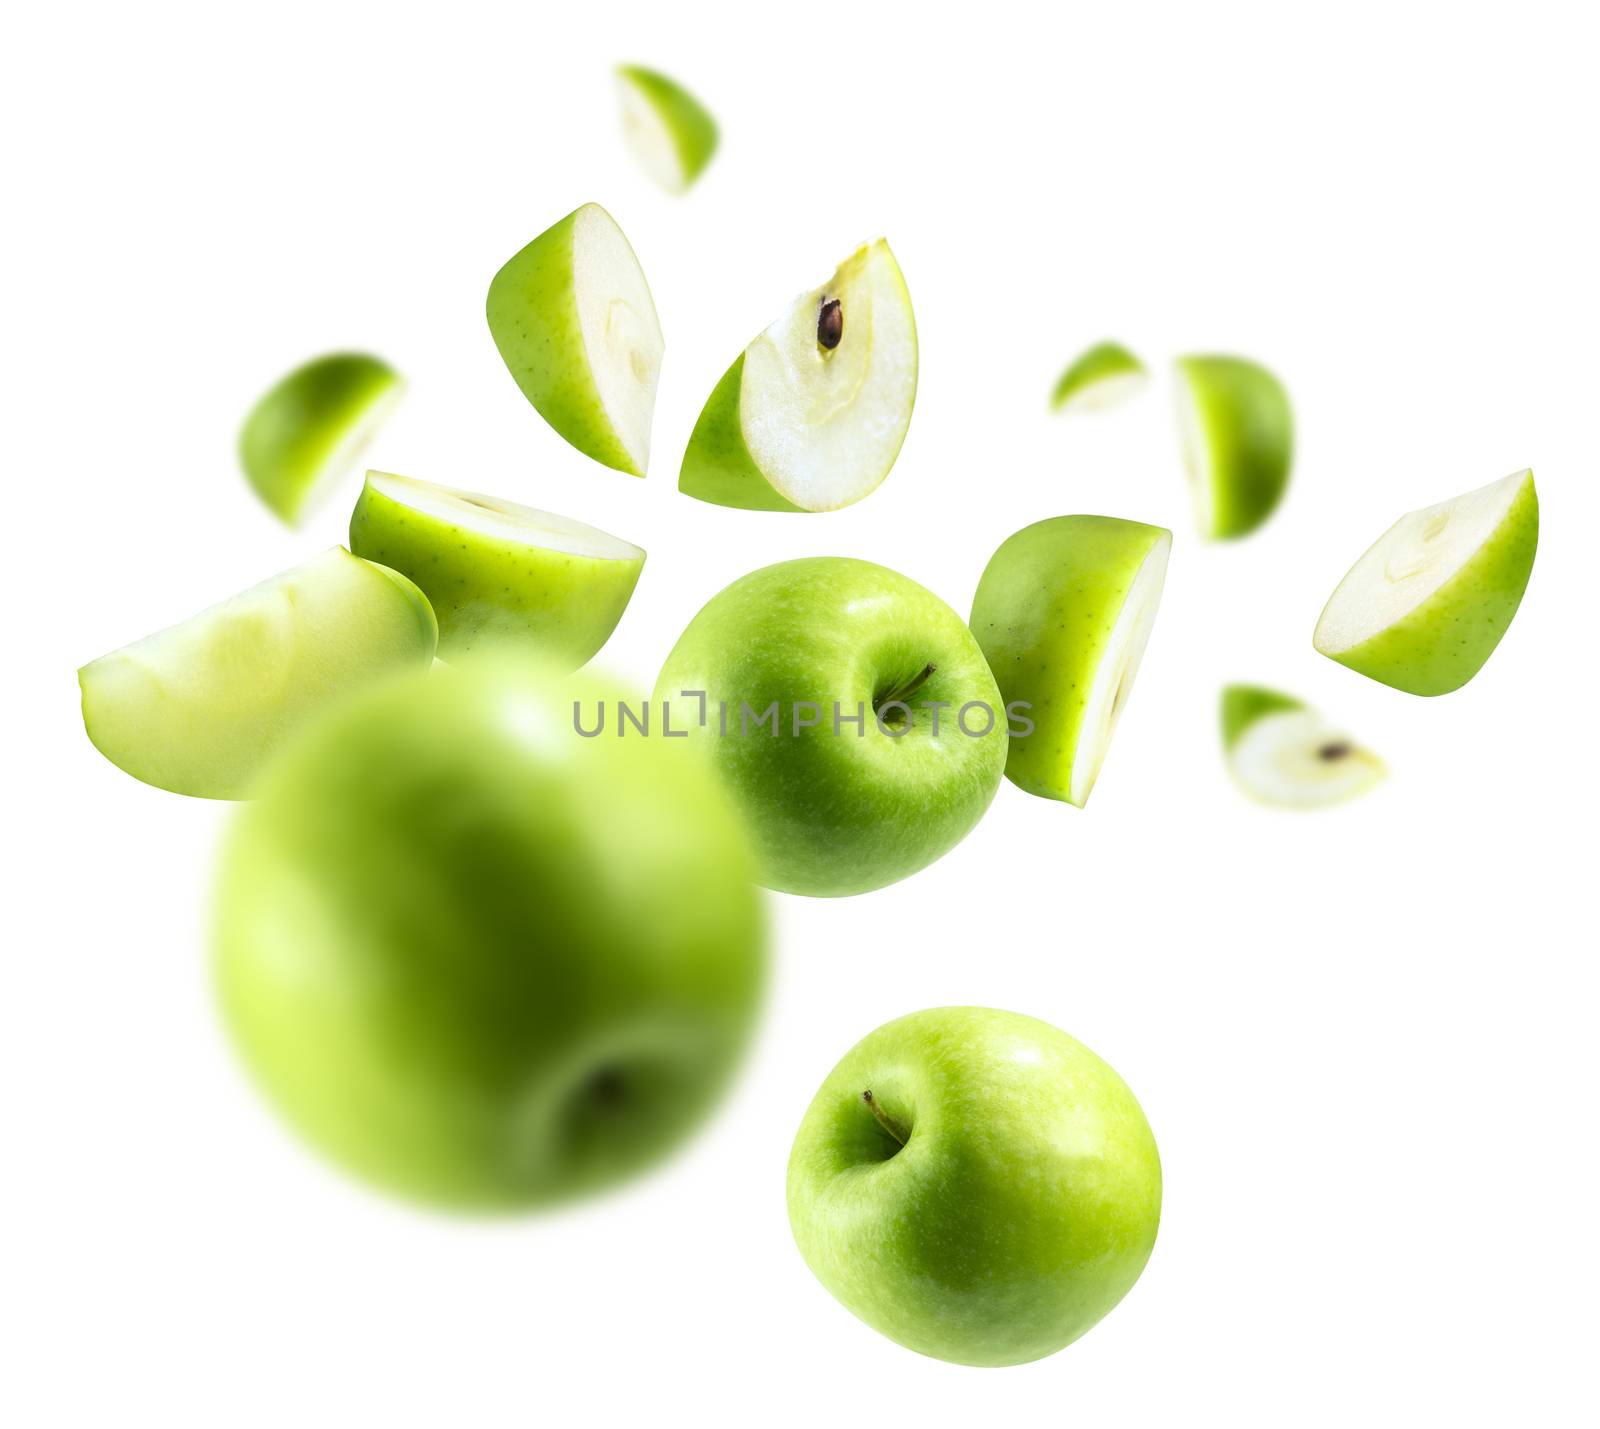 A group of green apples levitating on a white background.